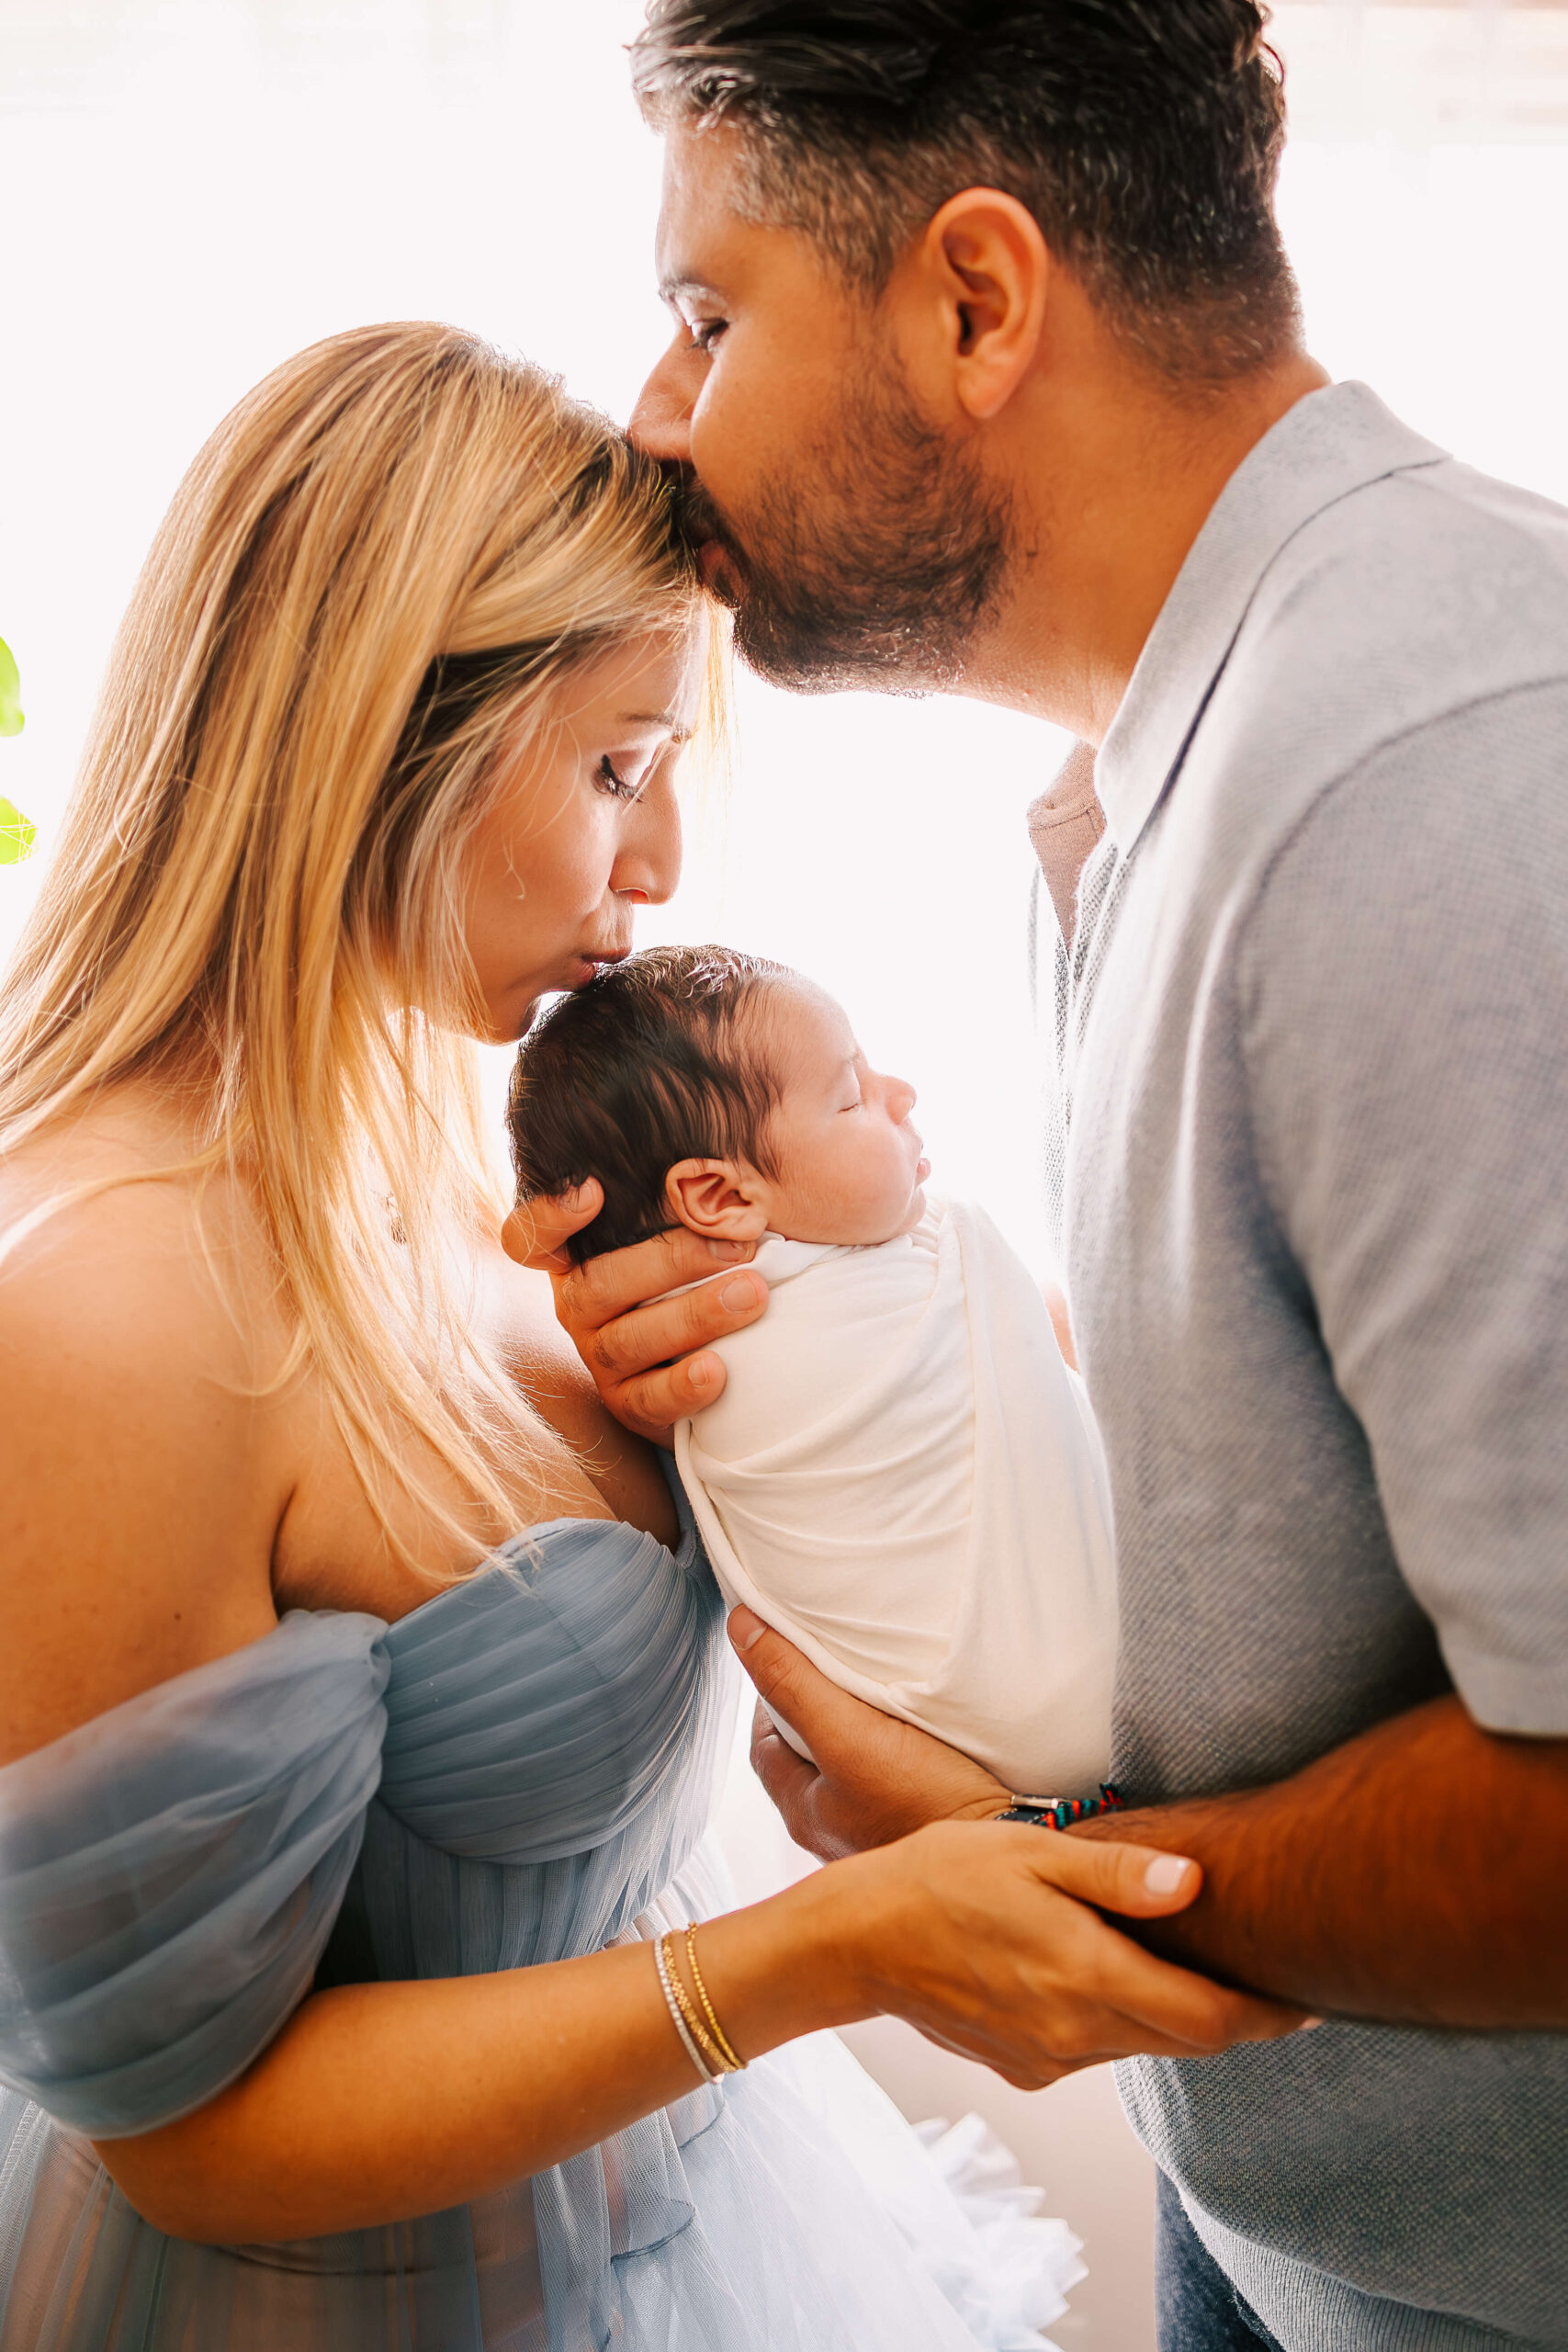 Dad is kissing moms forehead while mom kisses the top of babies head in front of big window in Orange County Studio by Ashley Nicole. For Postpartum Doula Los Angeles.